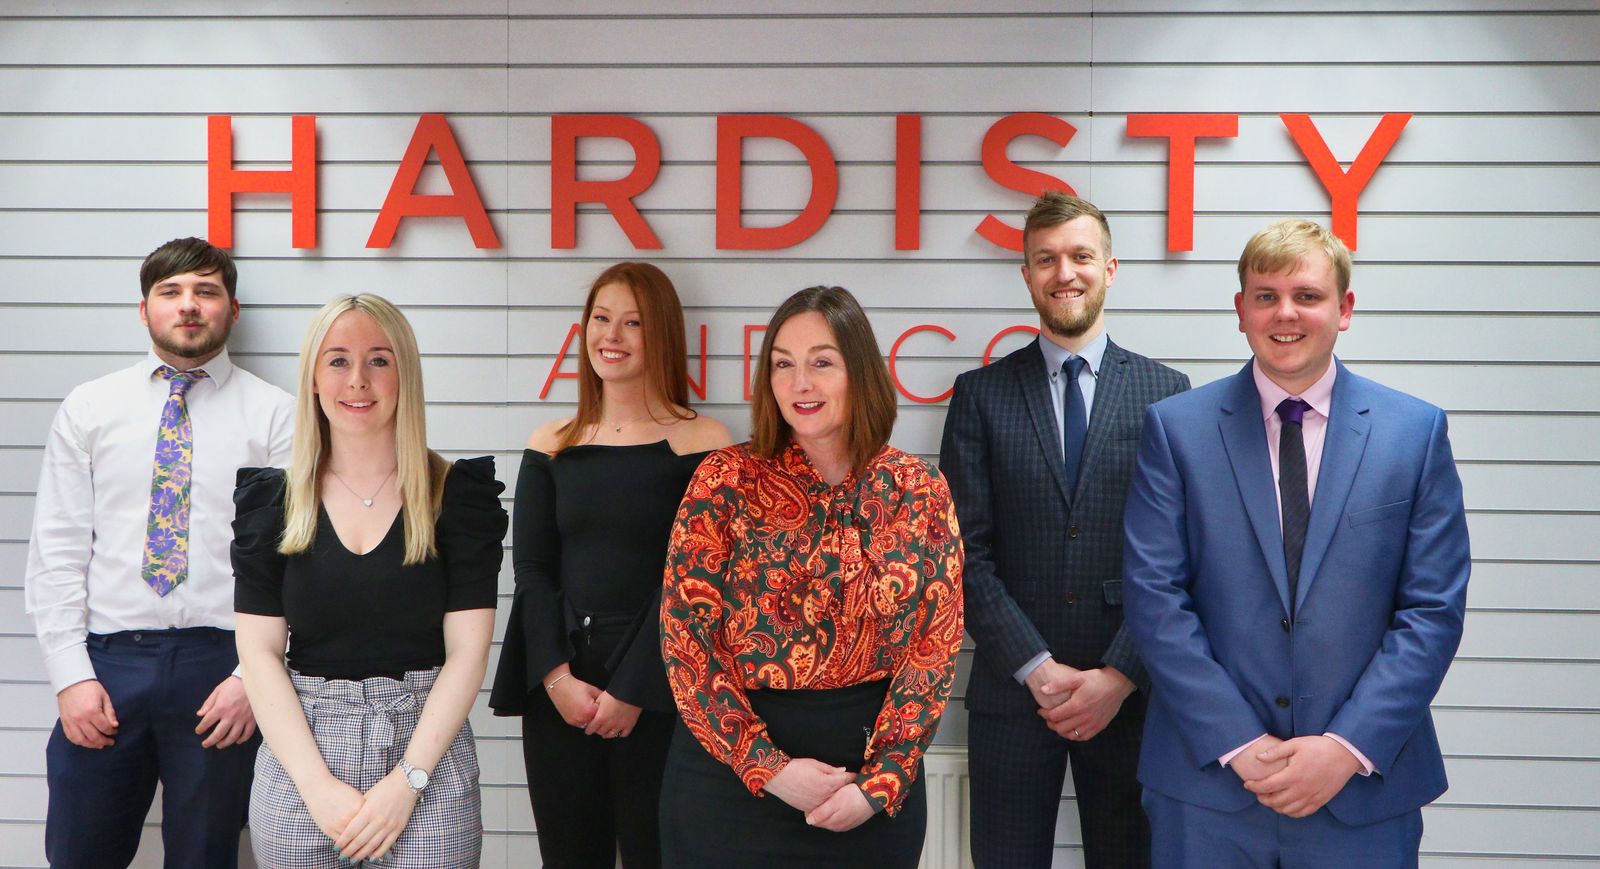 Family-owned estate agents expands with fourth branch